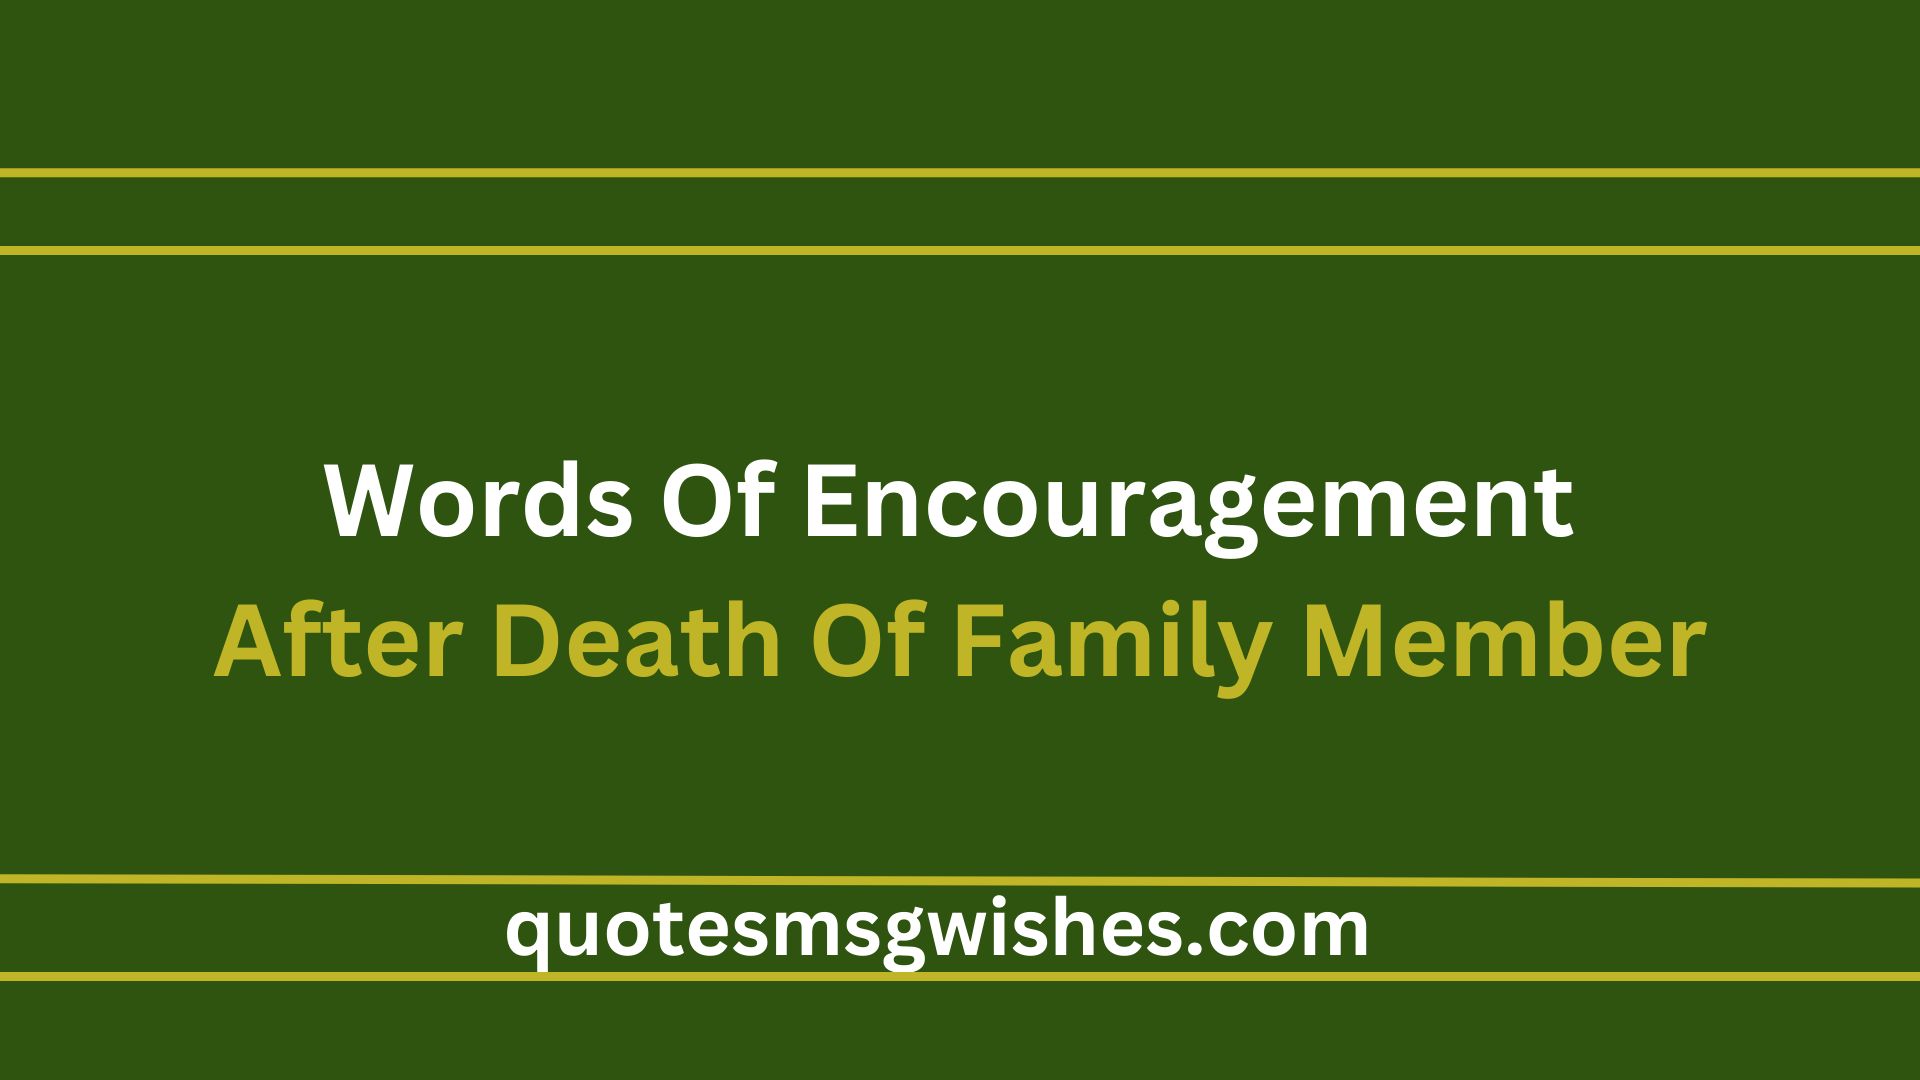 Words Of Encouragement After Death Of Family Member